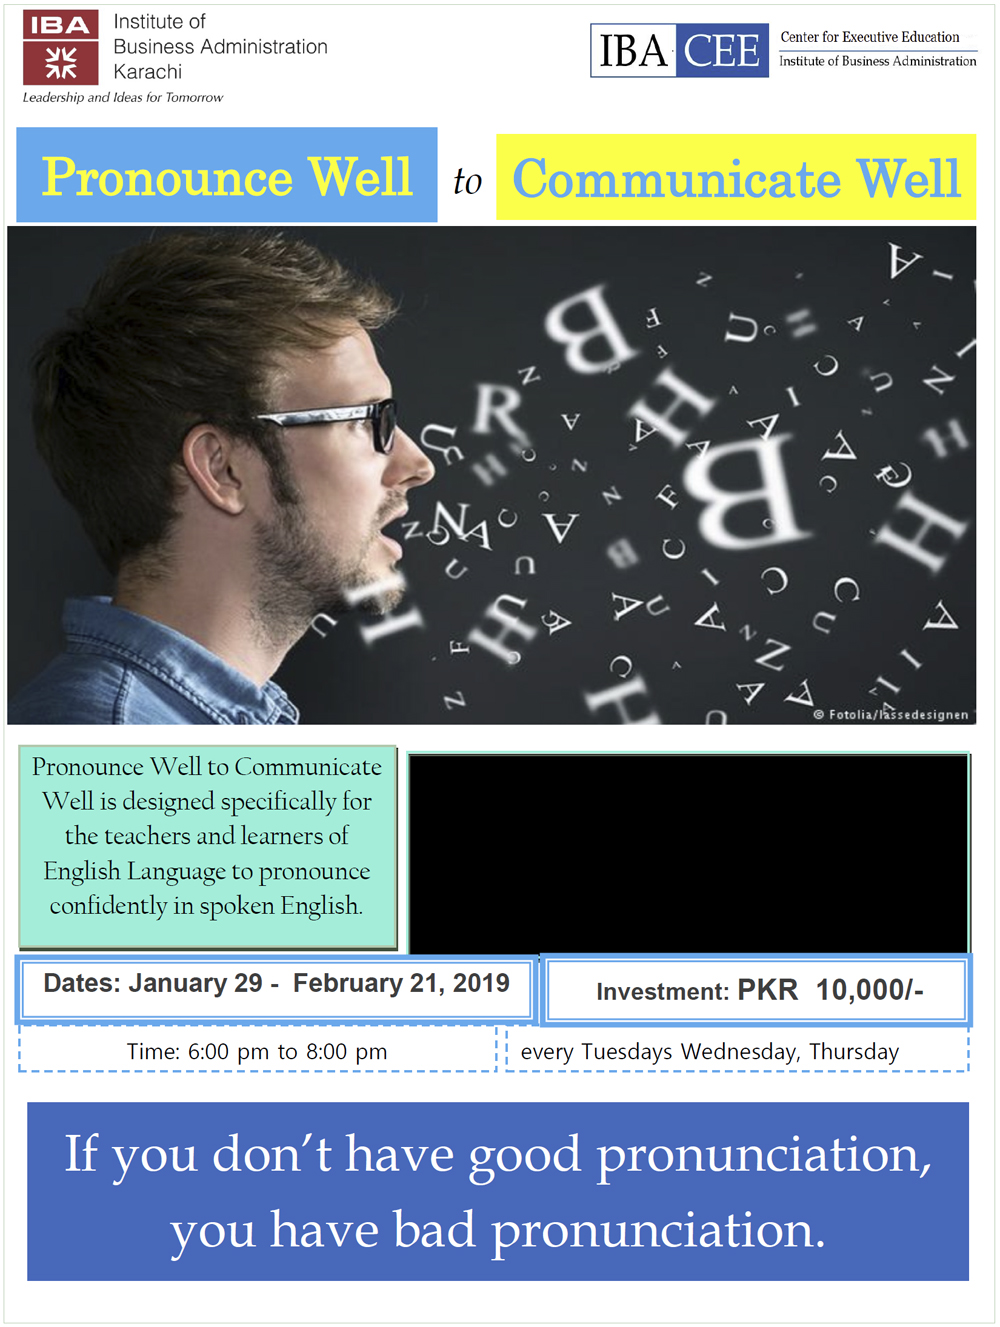 Pronounce Well to Communicate Well